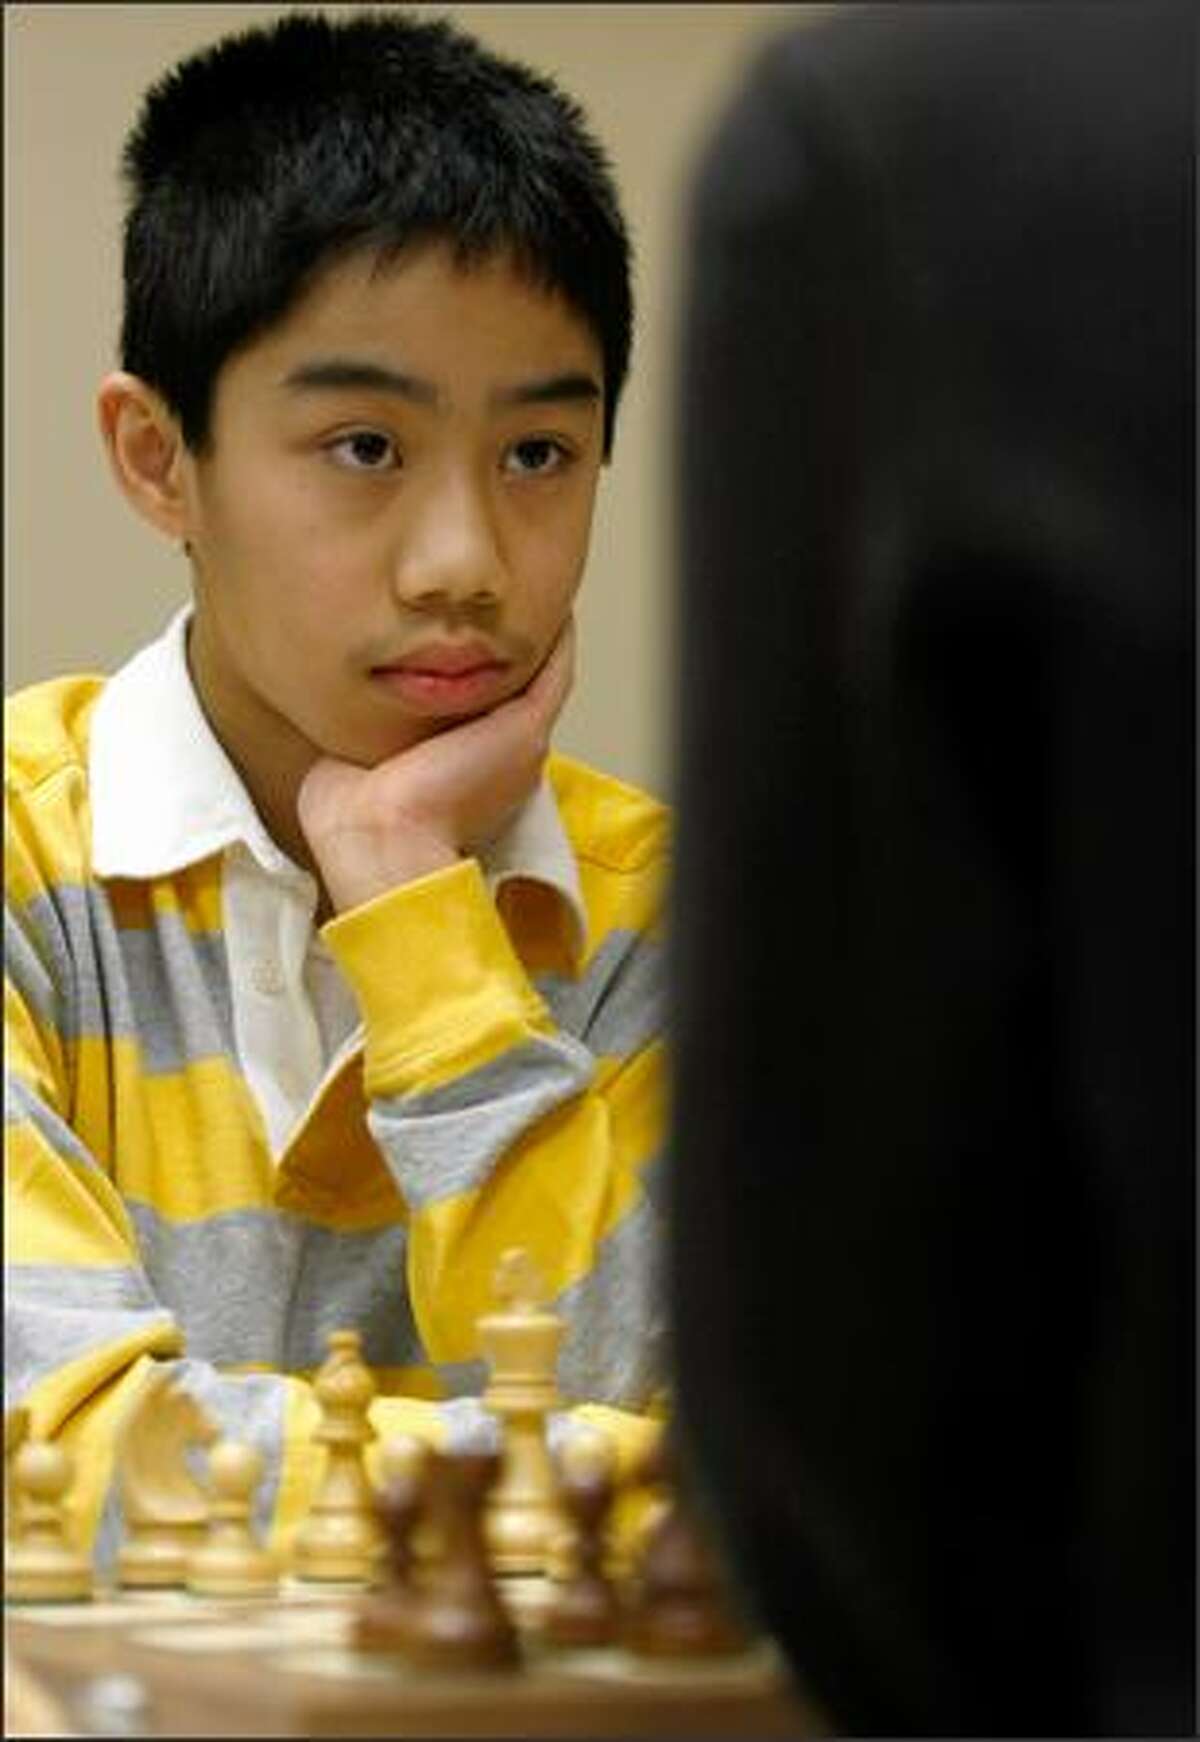 National master Michael Lee studies opponent Nat Koons Sunday at the opening of their eighth-round match in the Washington State Chess Championship in Seattle. At 14, Lee, of Bellevue, is rated in the top 1 percent of chess players in the nation.